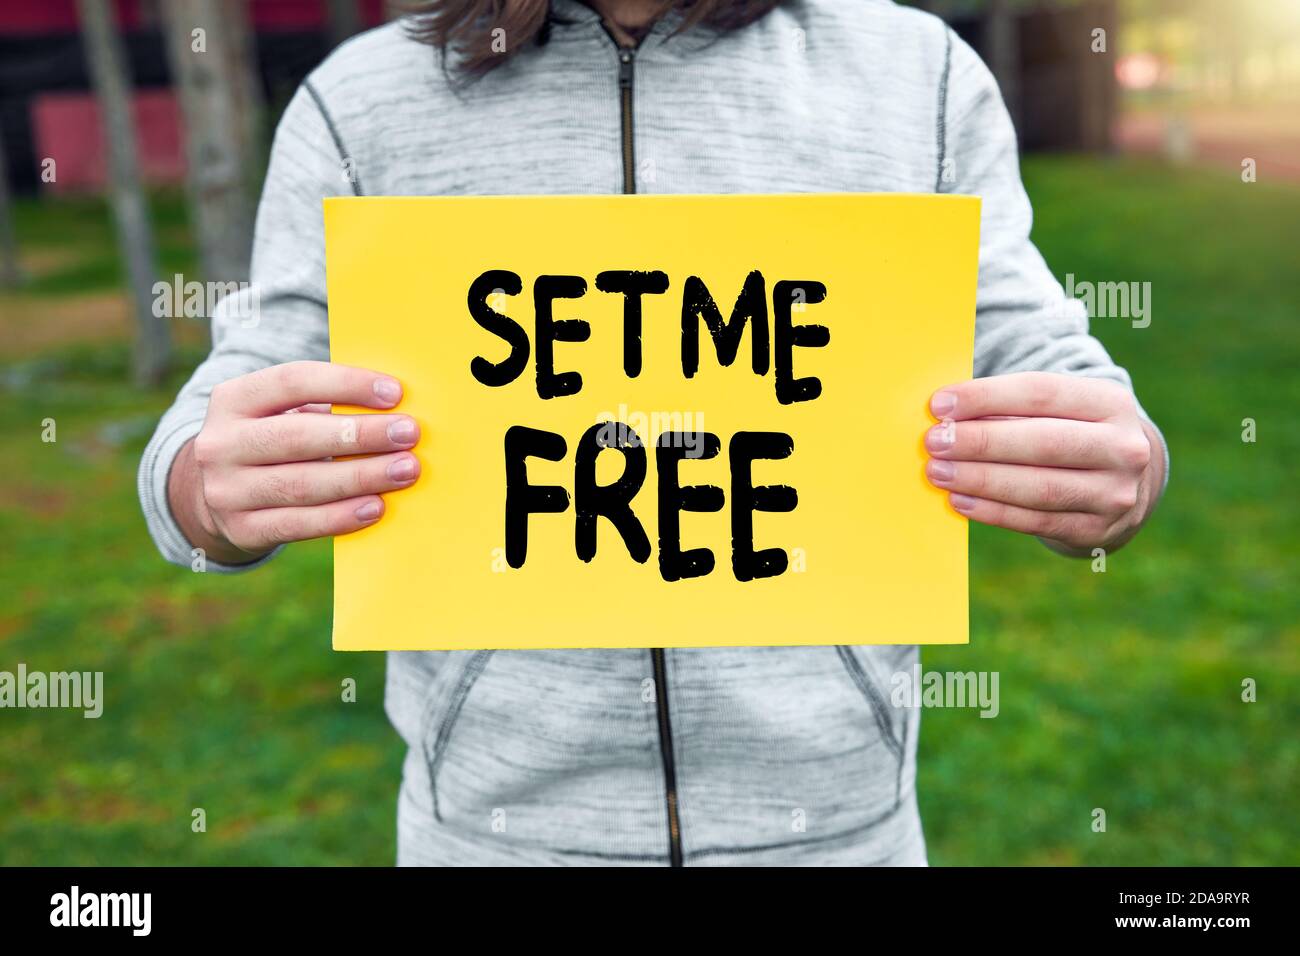 Male teenage boy holds a yellow banner with set me free text against nature background. Freedom and independence in puberty. Stock Photo